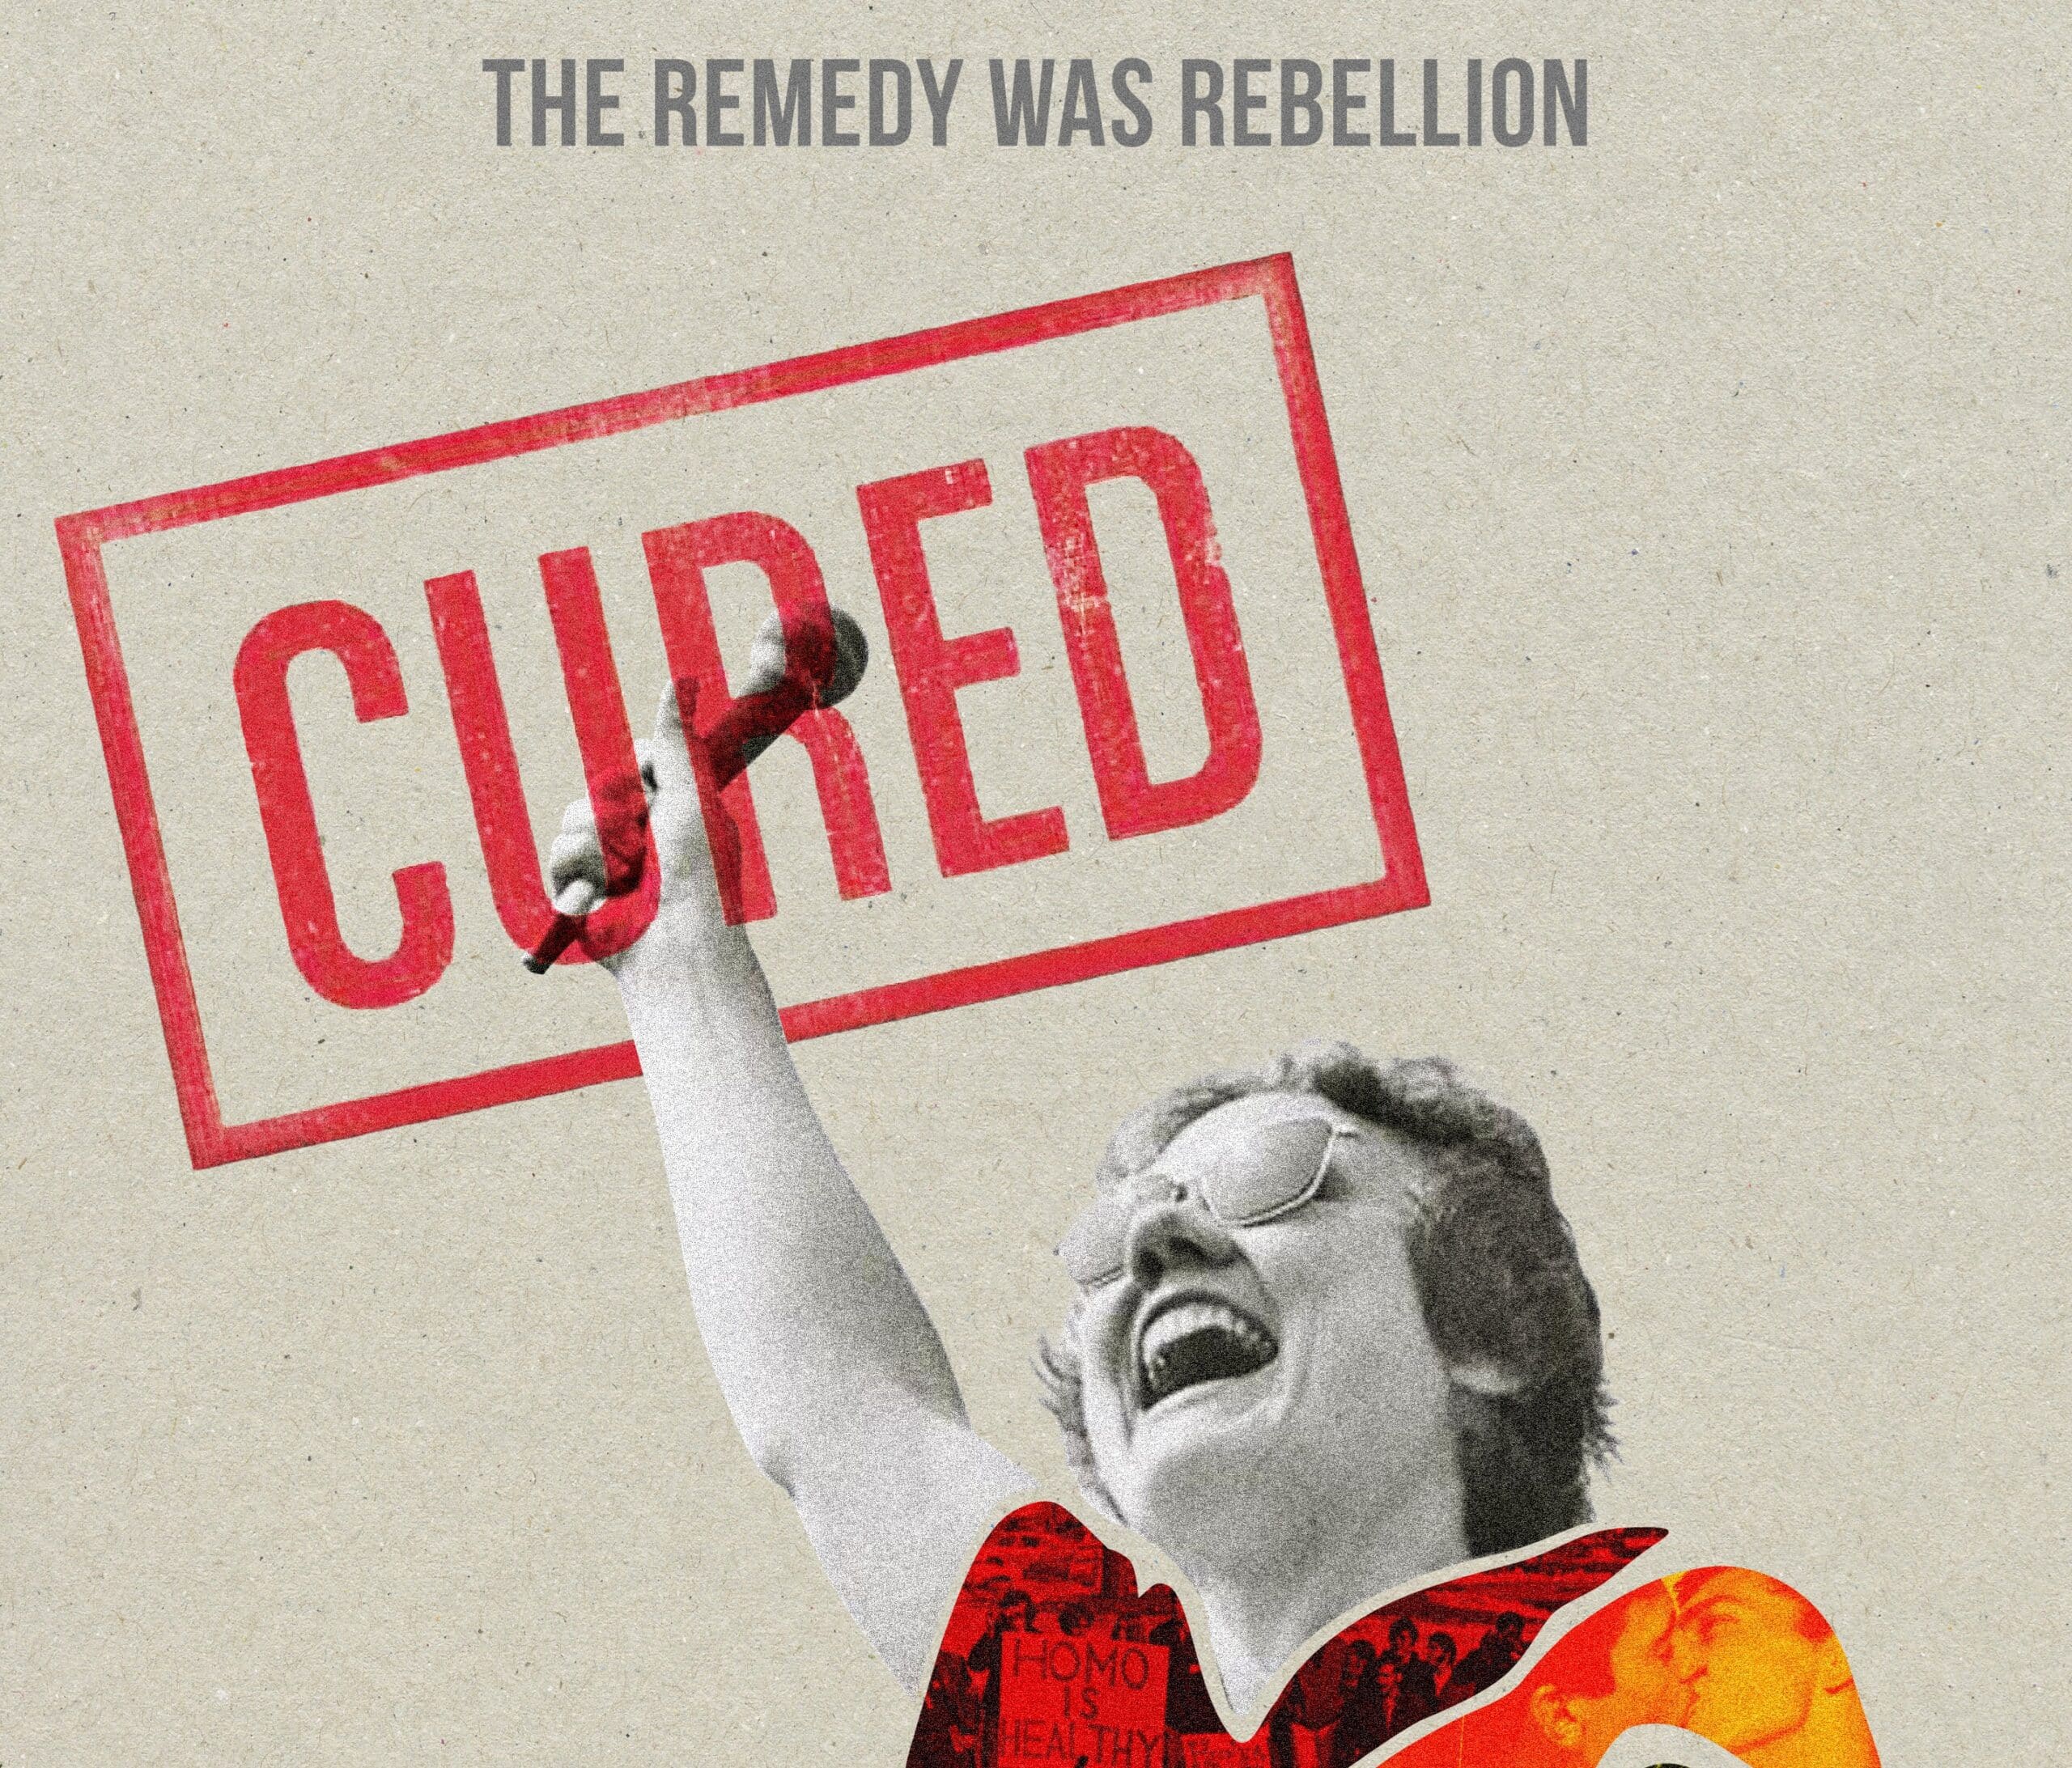 Protester with colorful shirt holding up a microphone, with the words "Cured: The Remedy was Rebellion" overlayed.